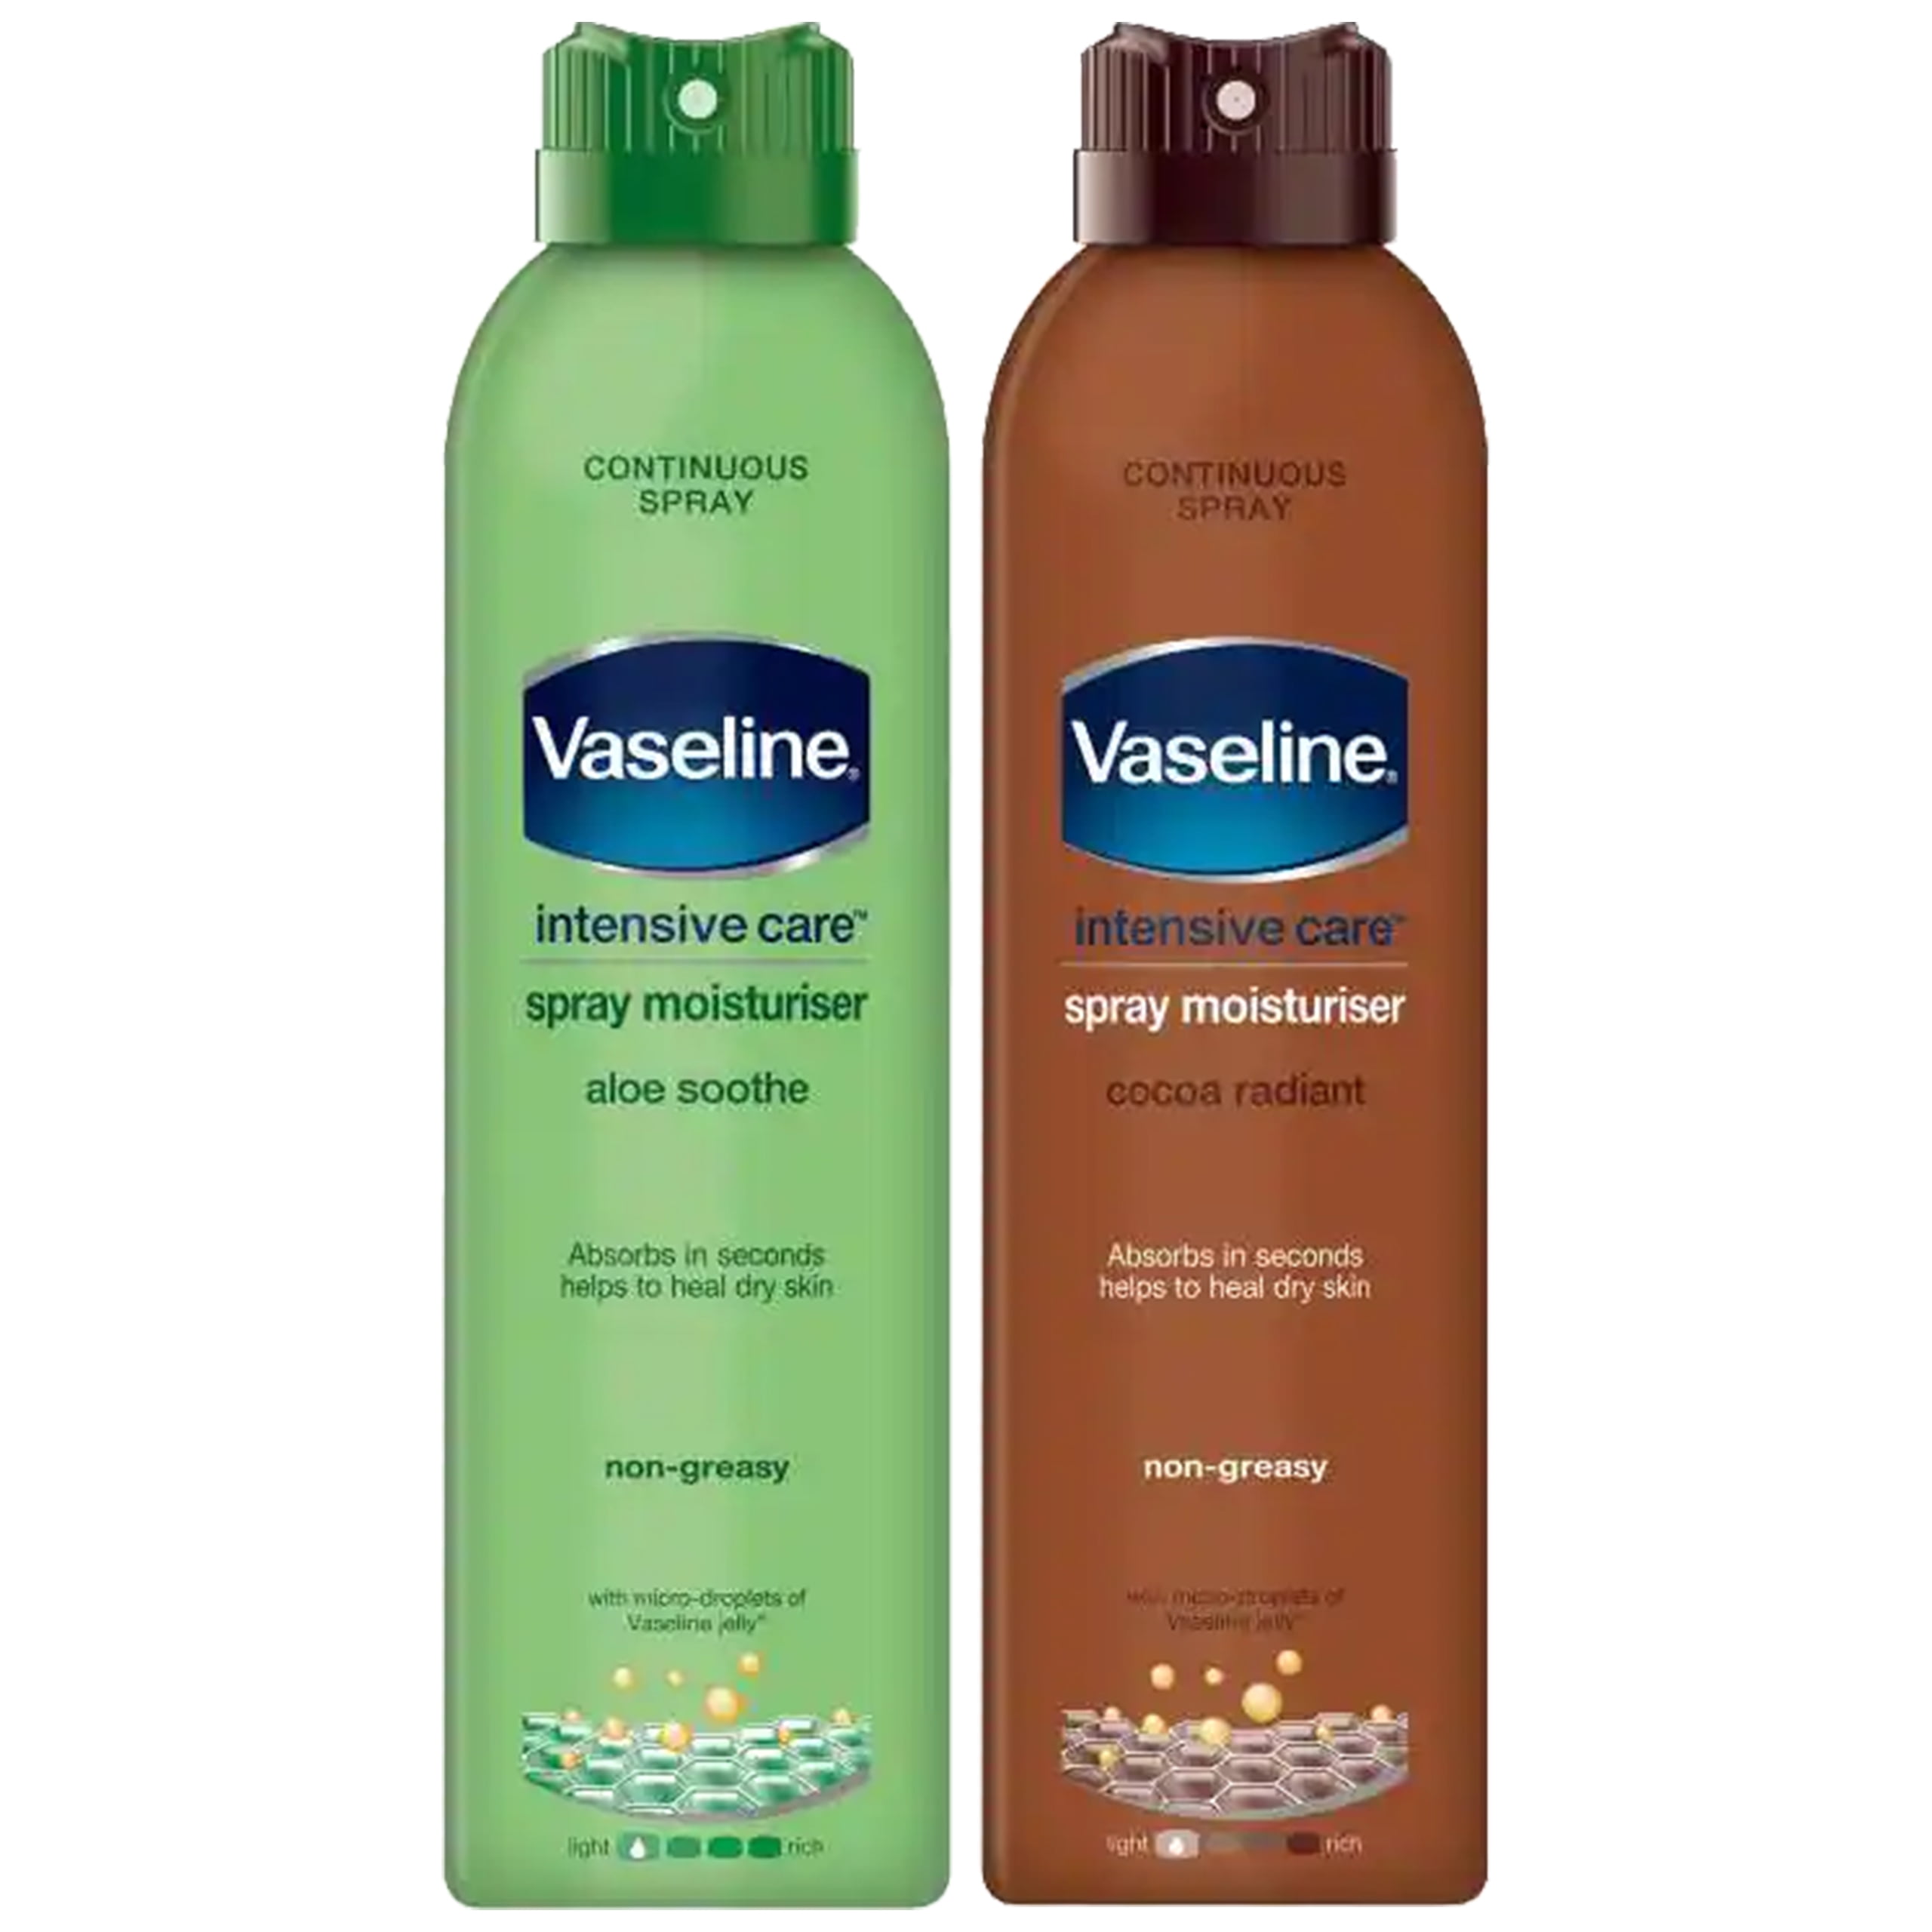 ankomst Efterligning pels Vaseline Spray & Go Moisturizer, Intensive Care Body Lotion, Duo Pack  Variety Mix, Aloe Sooth, and Cocoa Radiant, 1 Each 6.73 oz. - Walmart.com